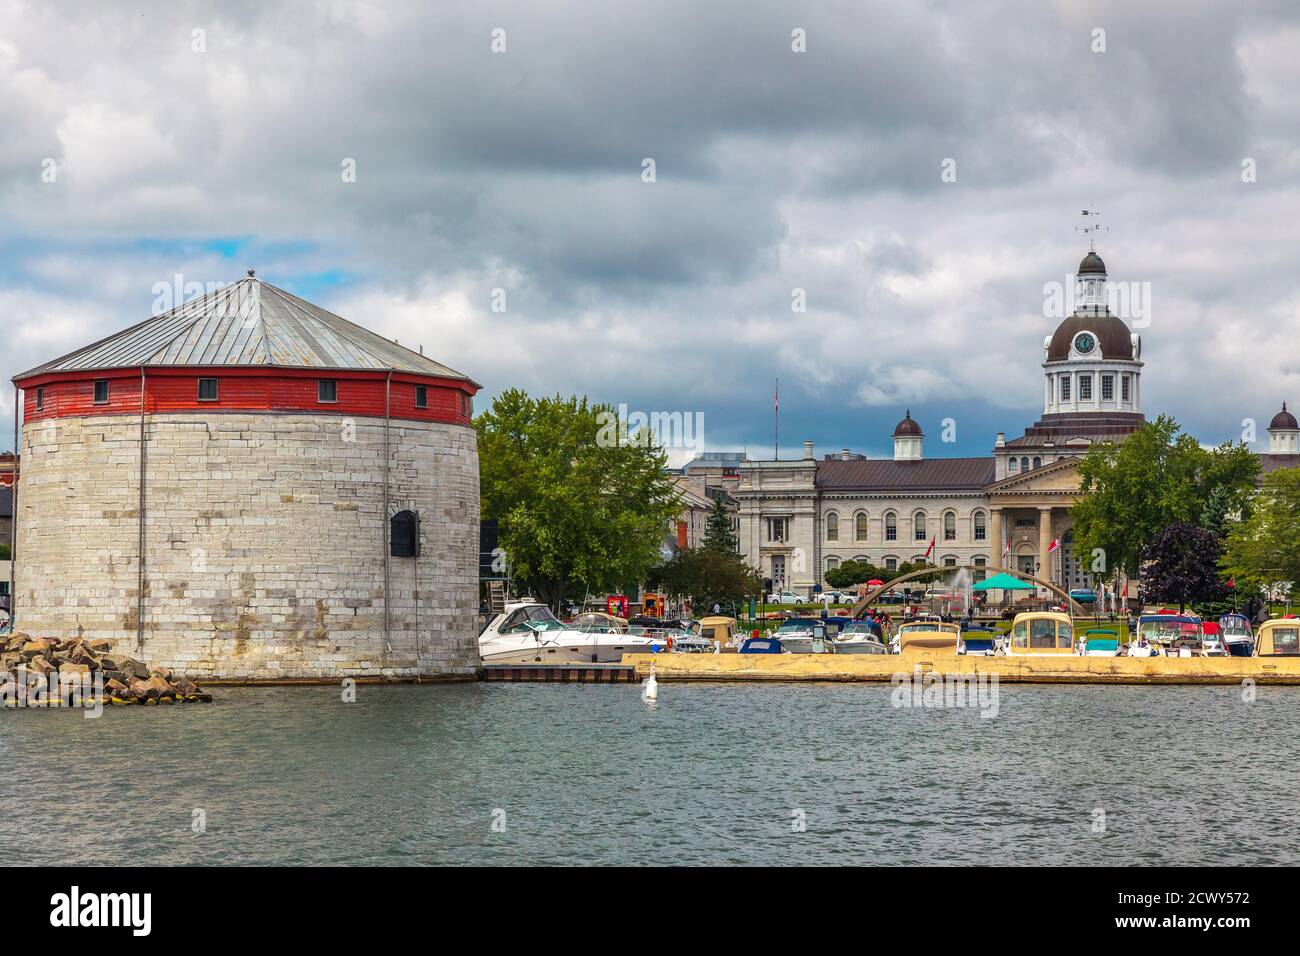 Shoal tower, Kingston, Ontario, August 2014 - Boats and limestone fortification on the waterfront with city hall in the background Stock Photo